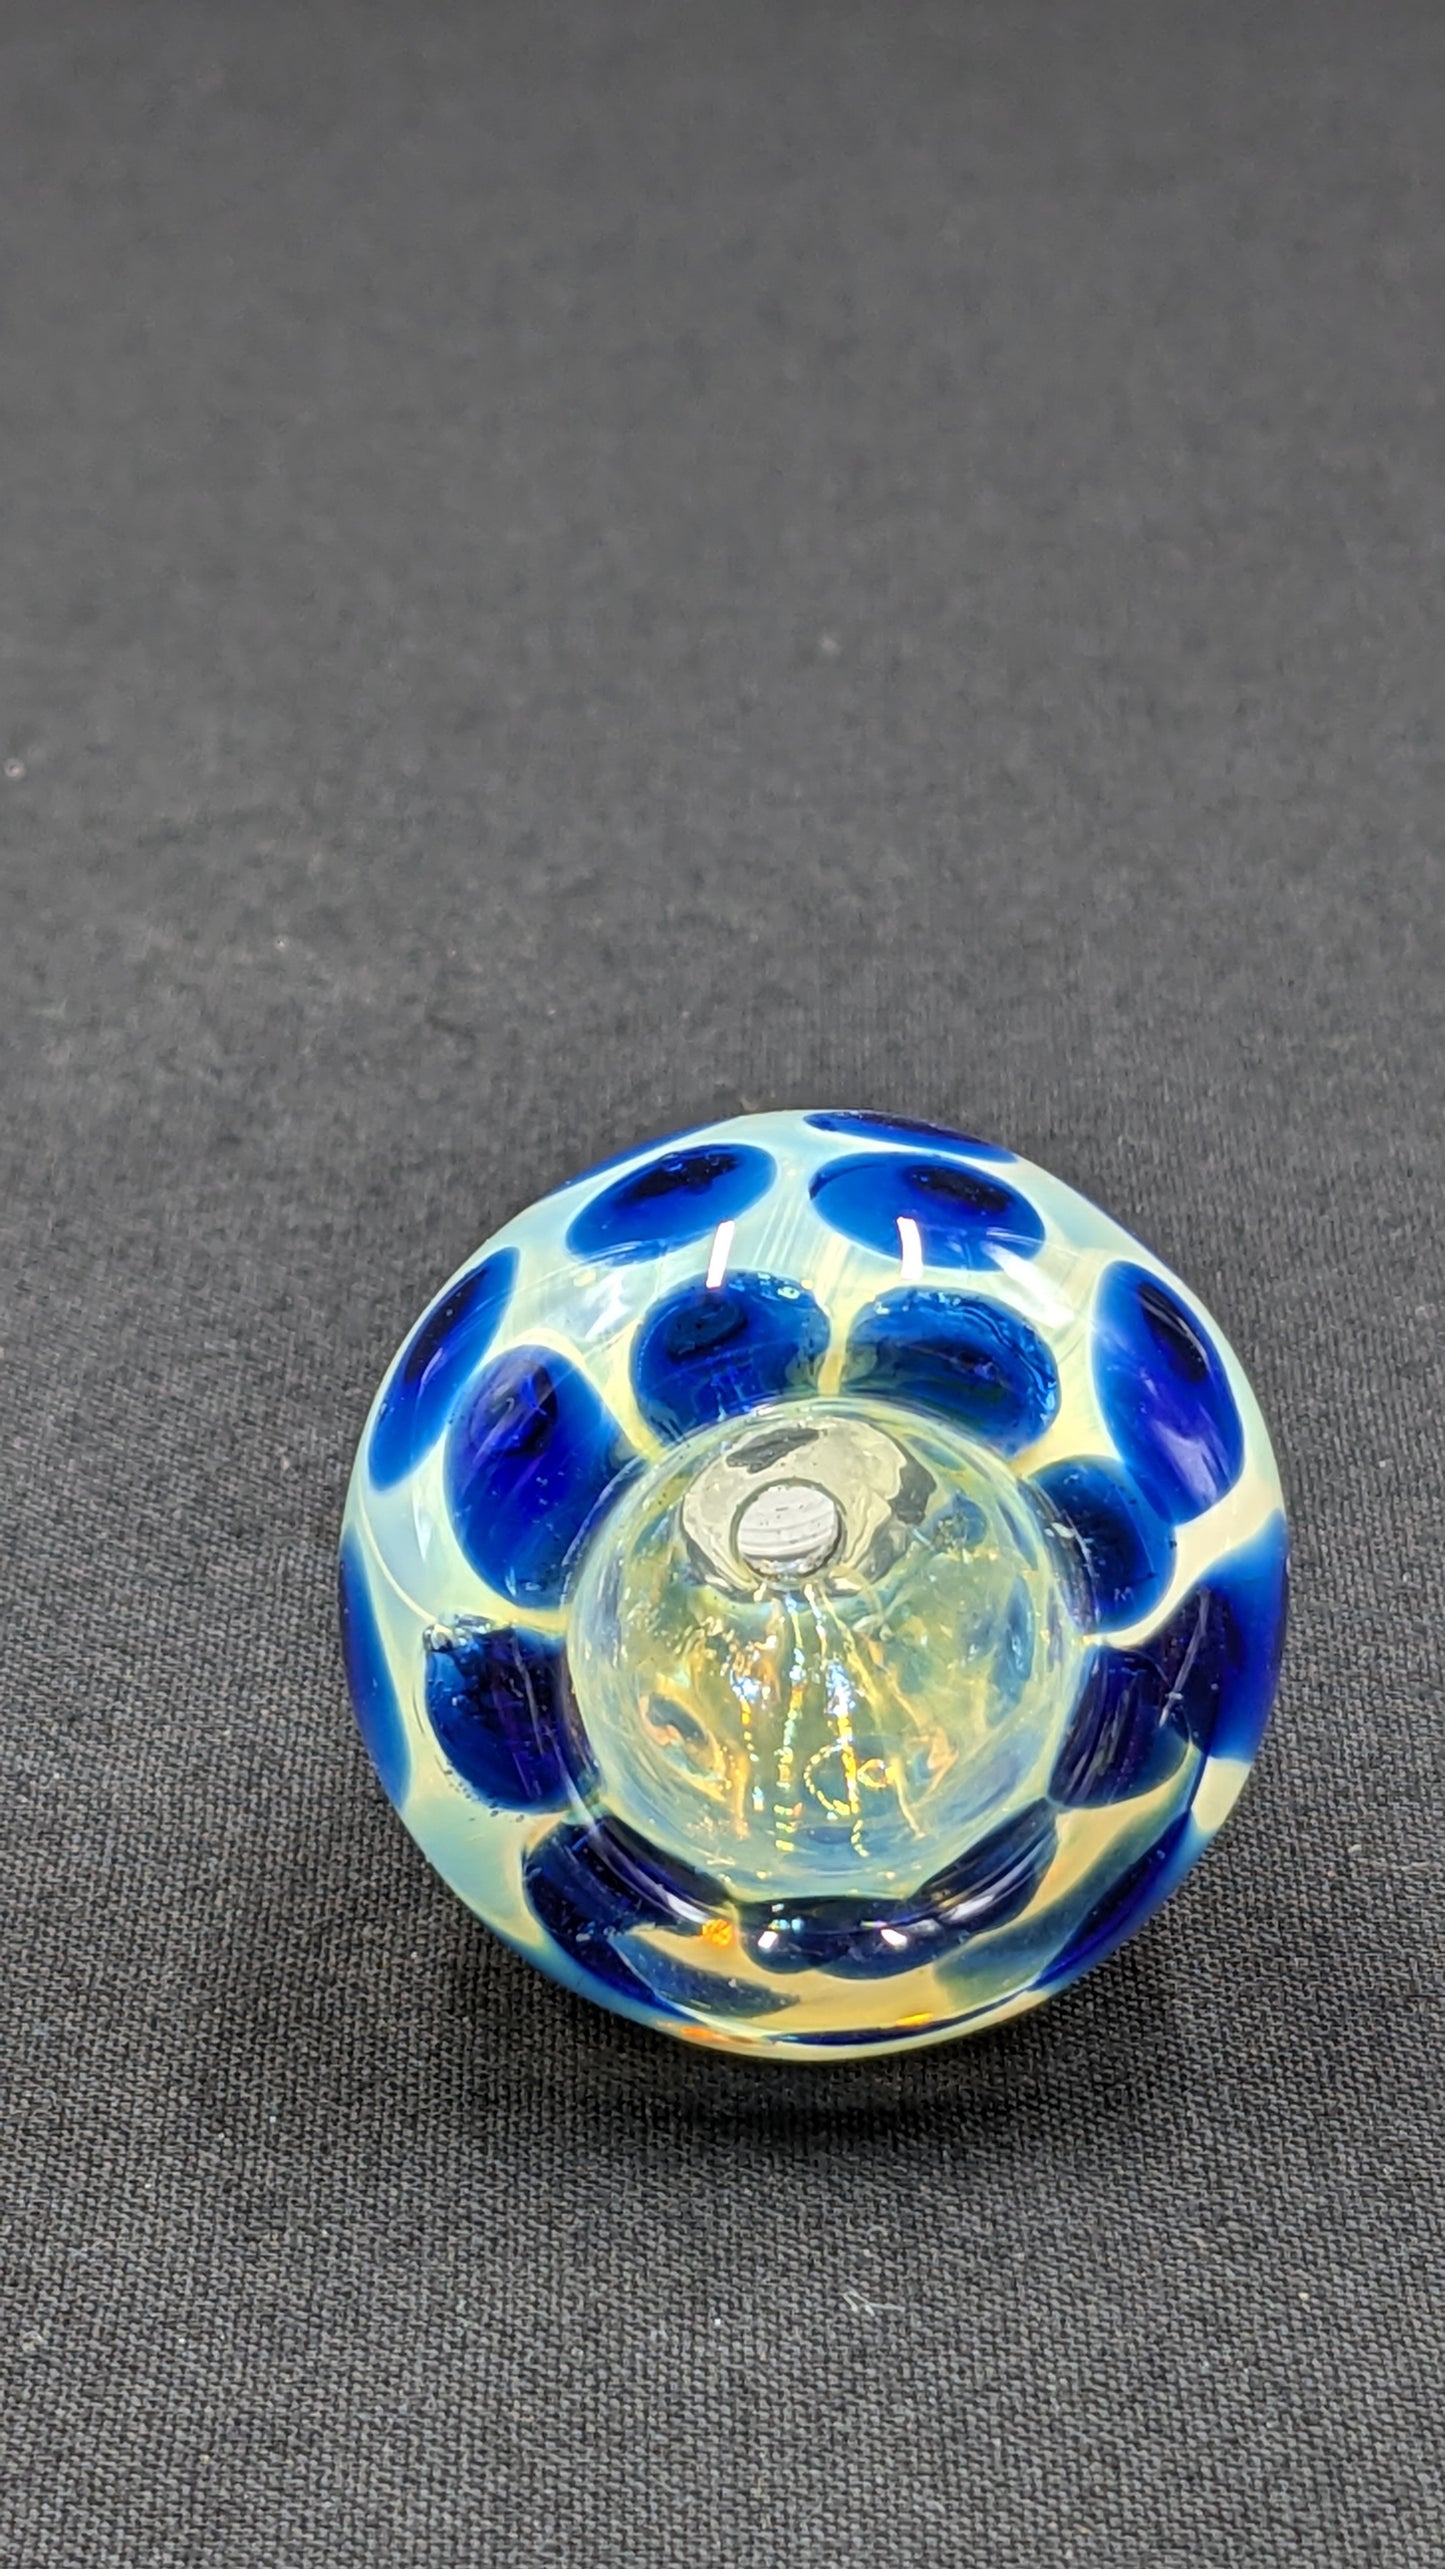 14mm Male Slide Bowl Glass for Water Pipes - BW05 Spotted BL